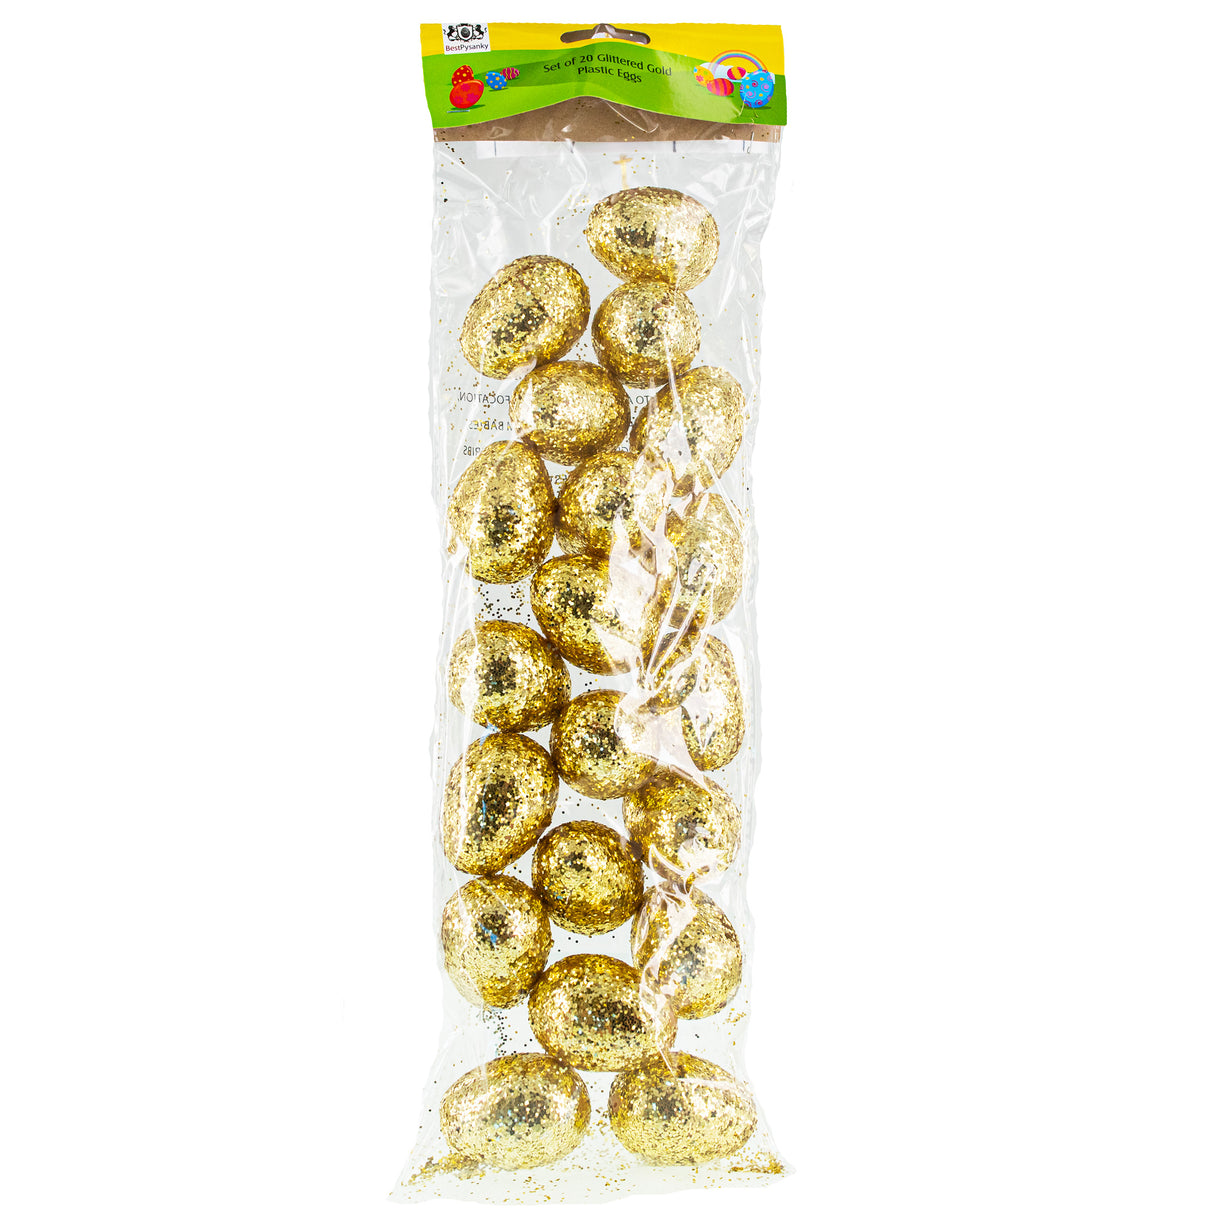 Golden Sparkle: Set of 20 Gold Glittered Fillable Plastic Easter Eggs 2.25 Inches ,dimensions in inches: 2.25 x 1.65 x 1.65